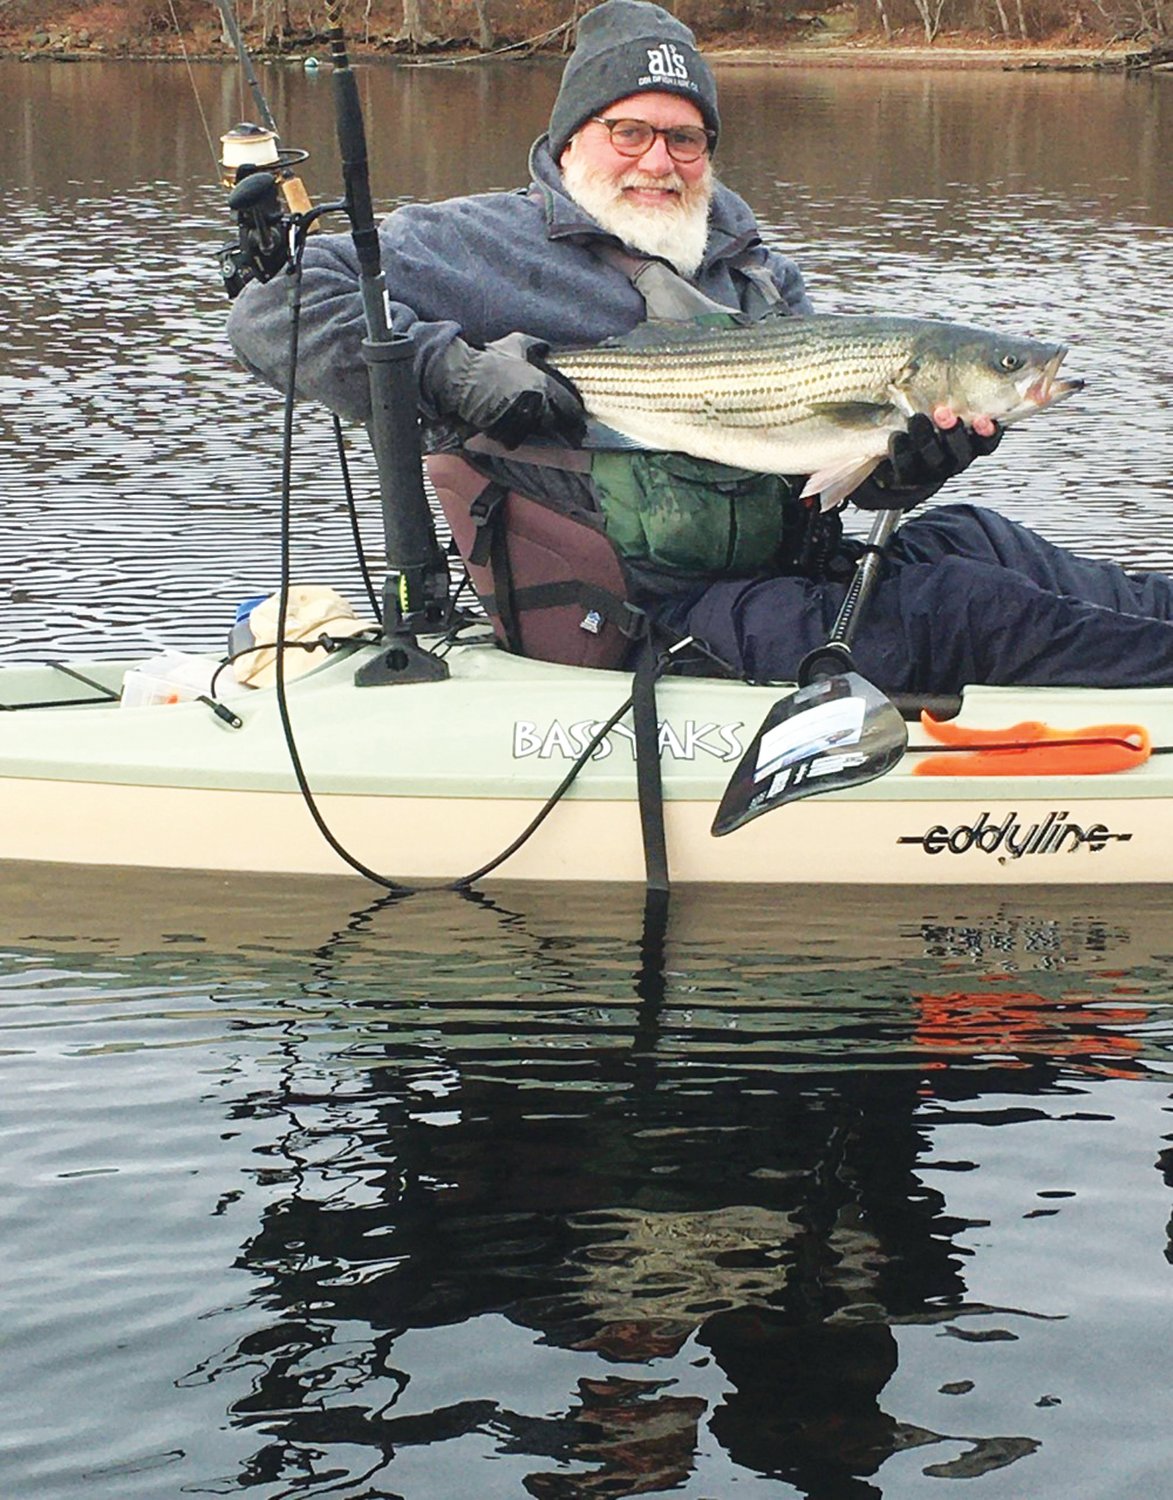 STRIPED BASS: Warming water has allowed fishing writer Todd Corayer to catch striped bass throughout the past three winters in Rhode Island’s salt ponds. (Submitted photos)